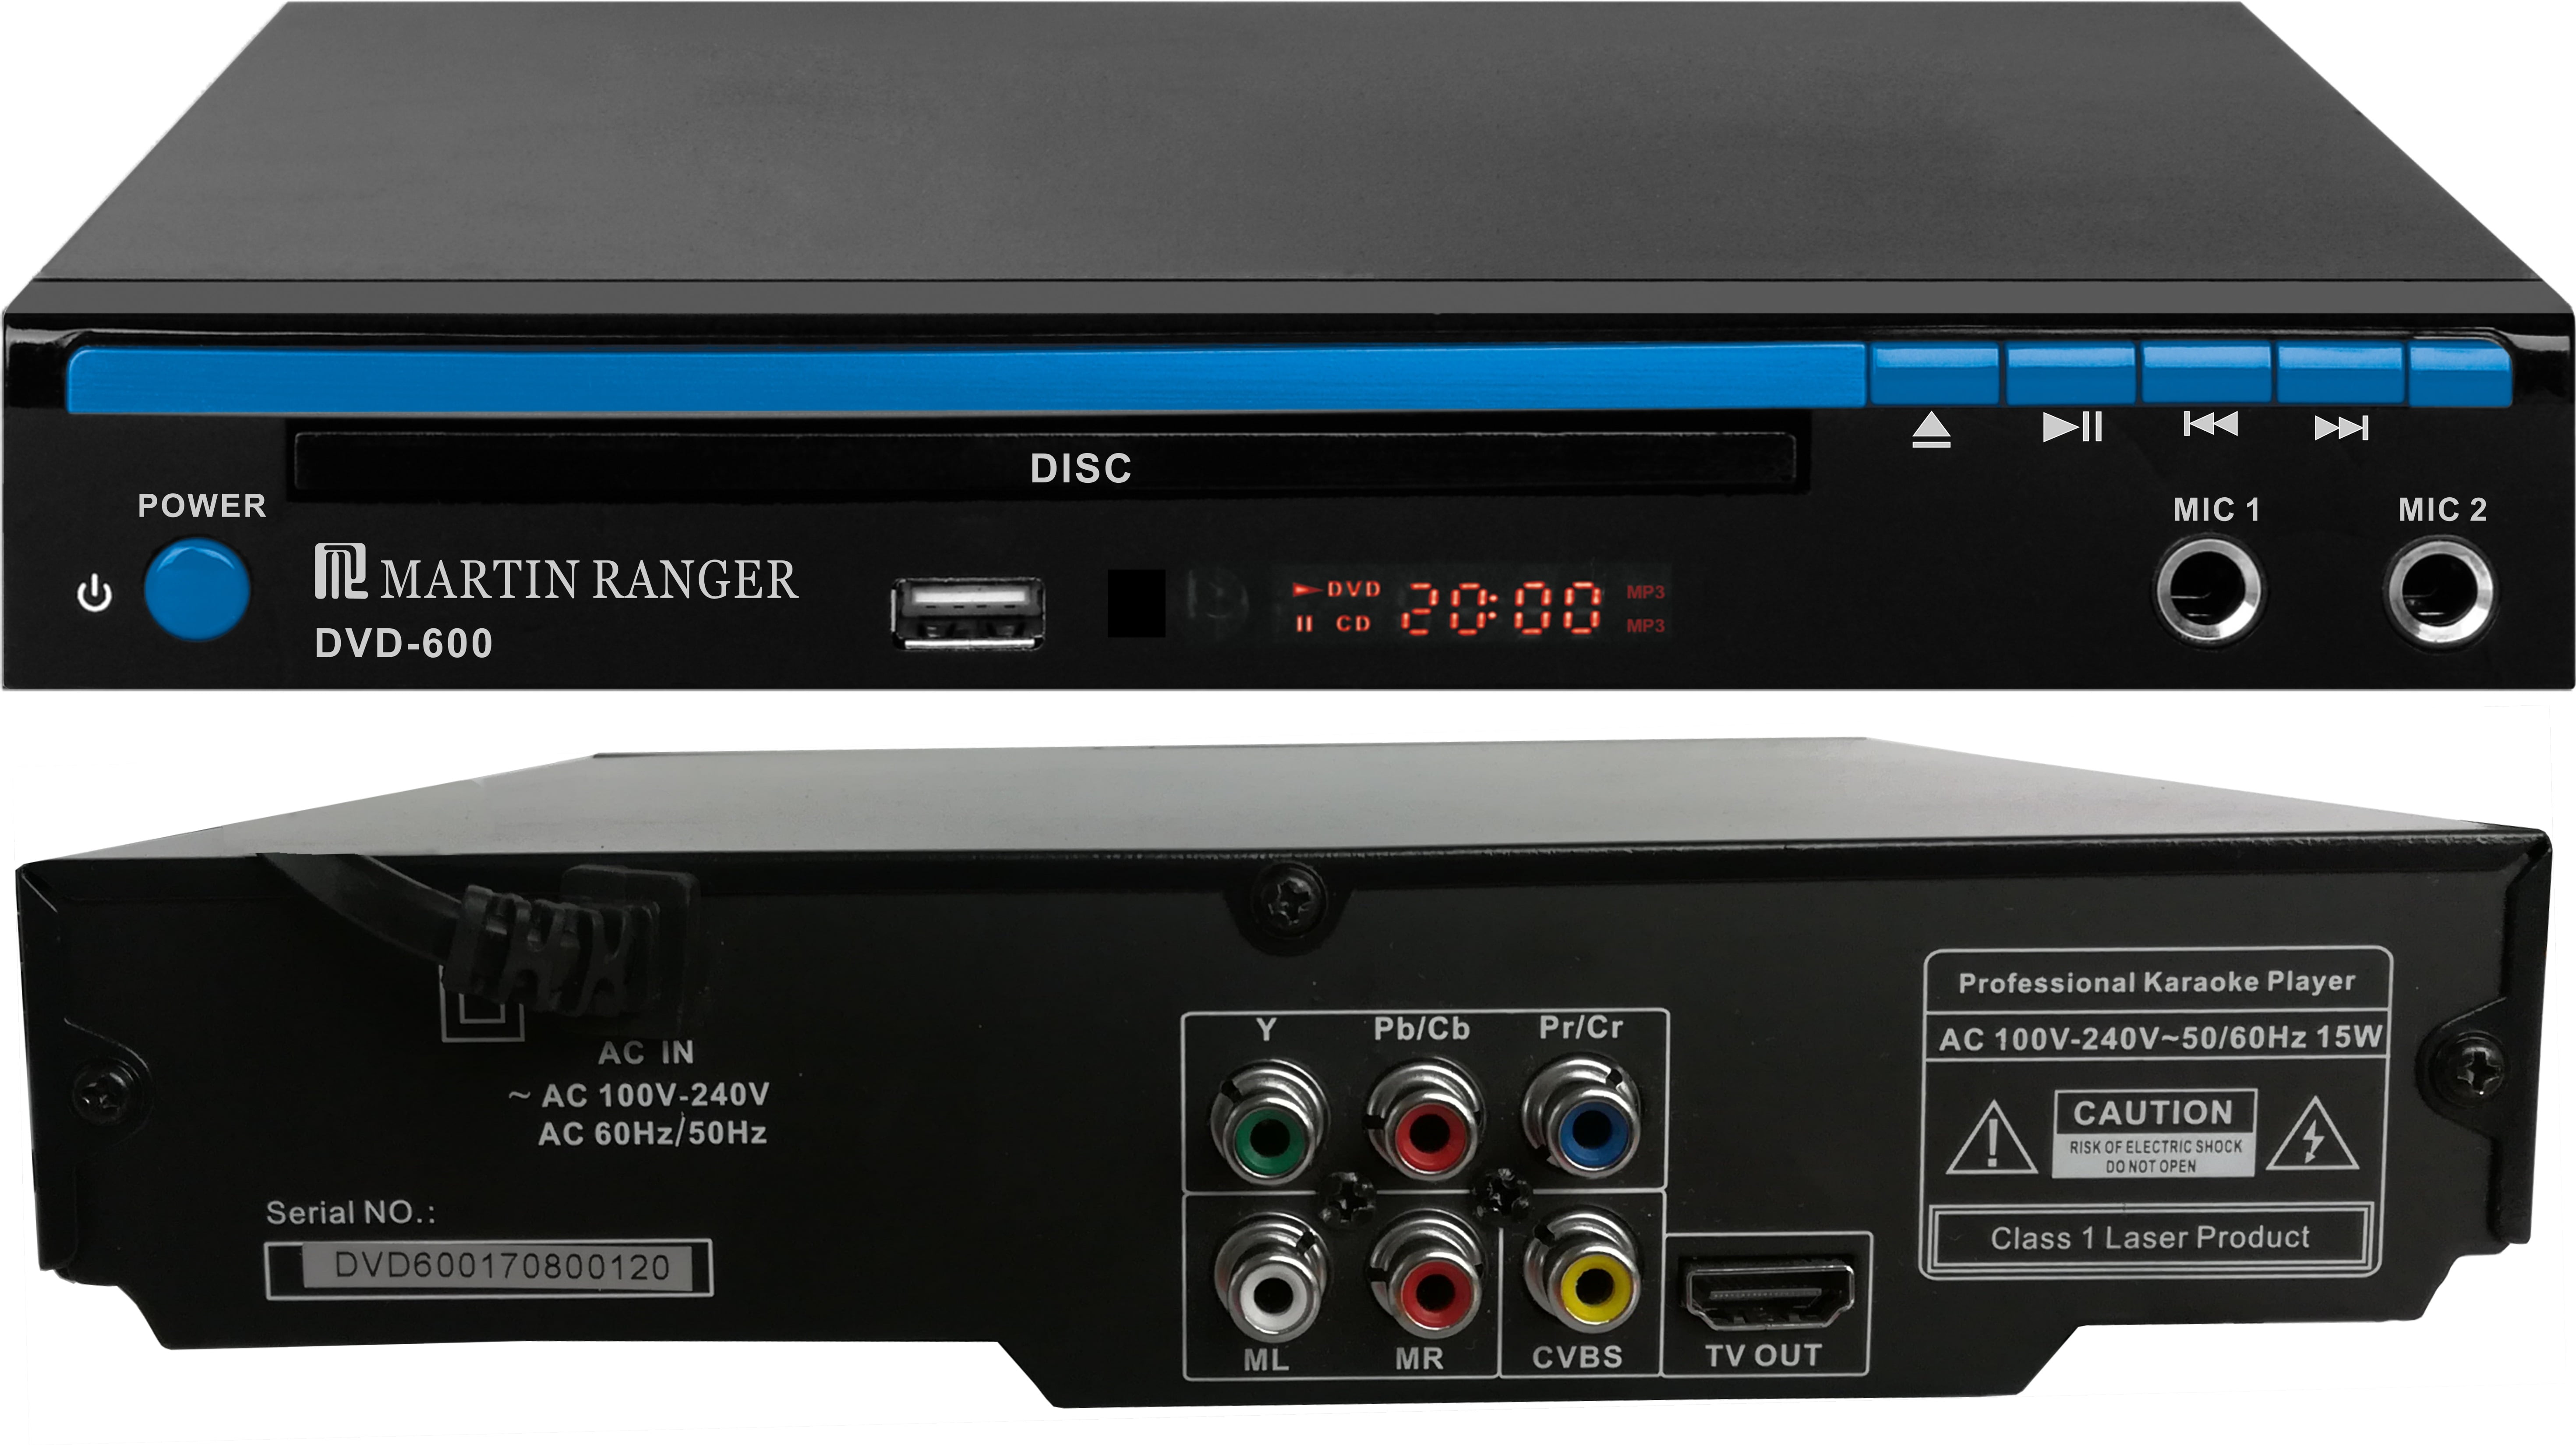 Martin Ranger 1080p HDMI Multi Region Code Free DVD Player with USB  Playback and Karaoke Functions and One Microphones